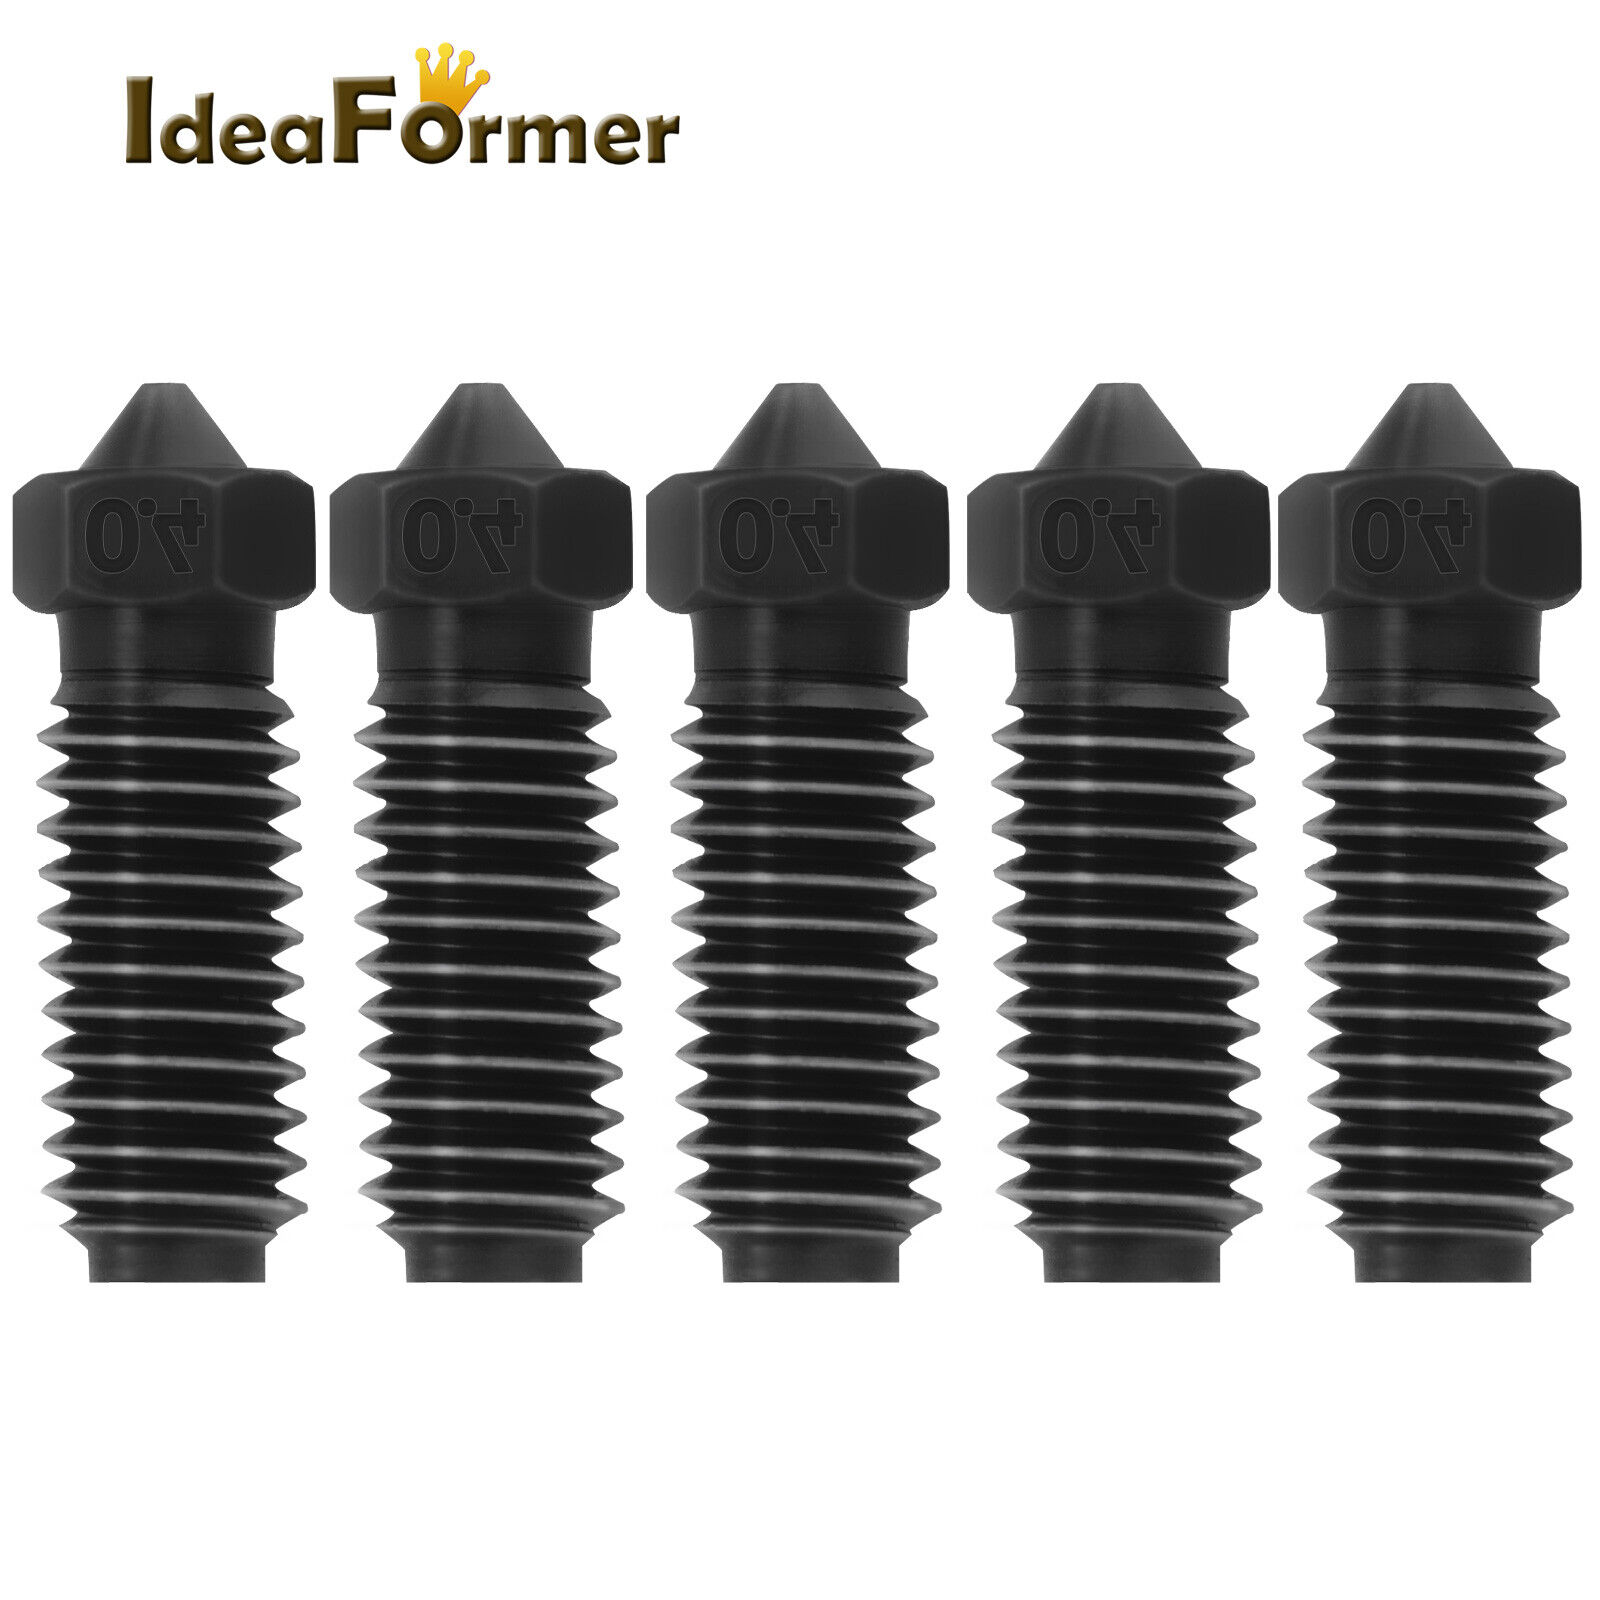 For Anycubic Kobra 3 Printer High Flow Hardened Steel Nozzle 0.4/0.6/0.8mm 5pcs